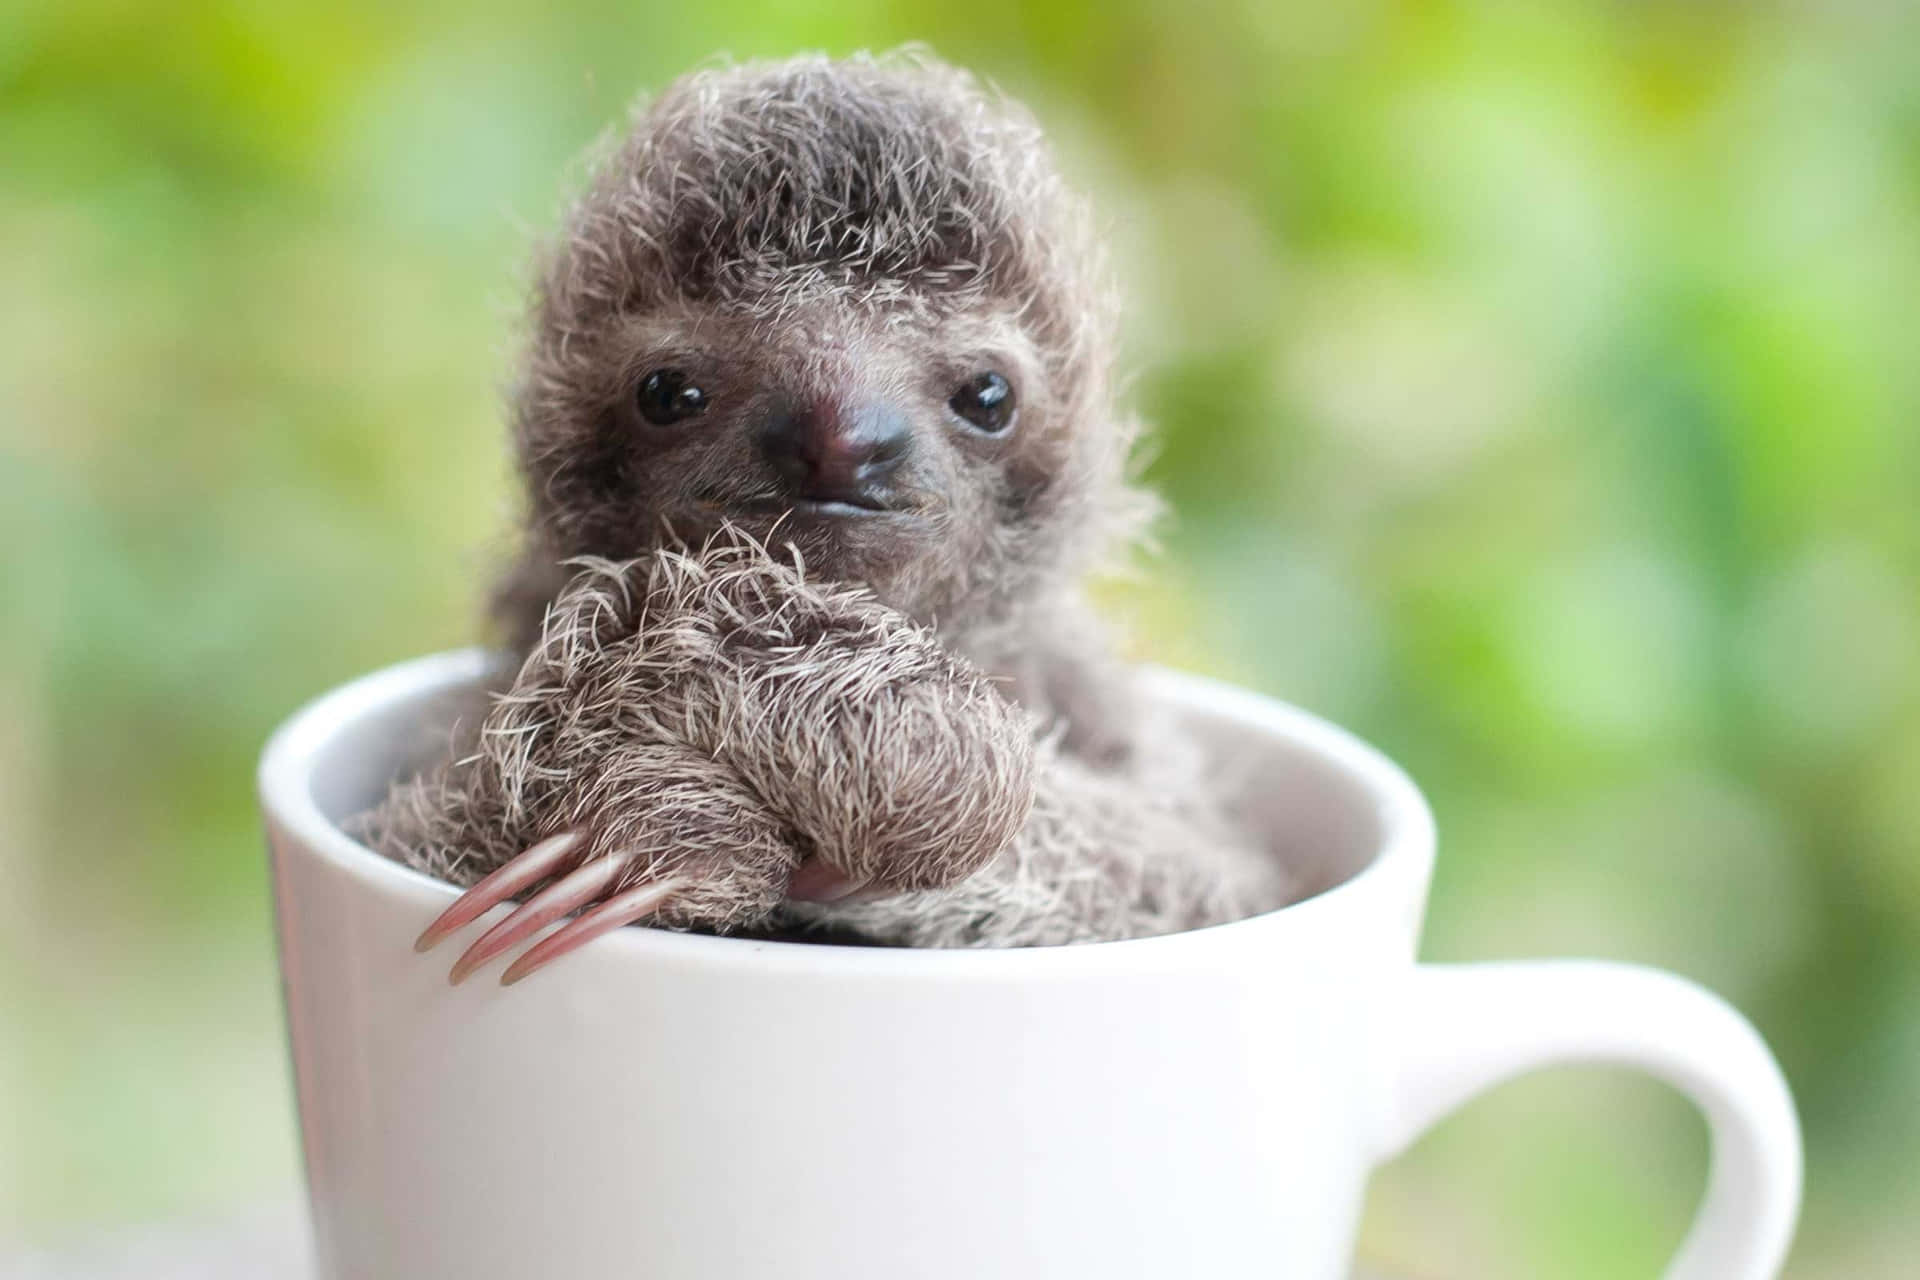 Cute Sloth In Teacup Picture